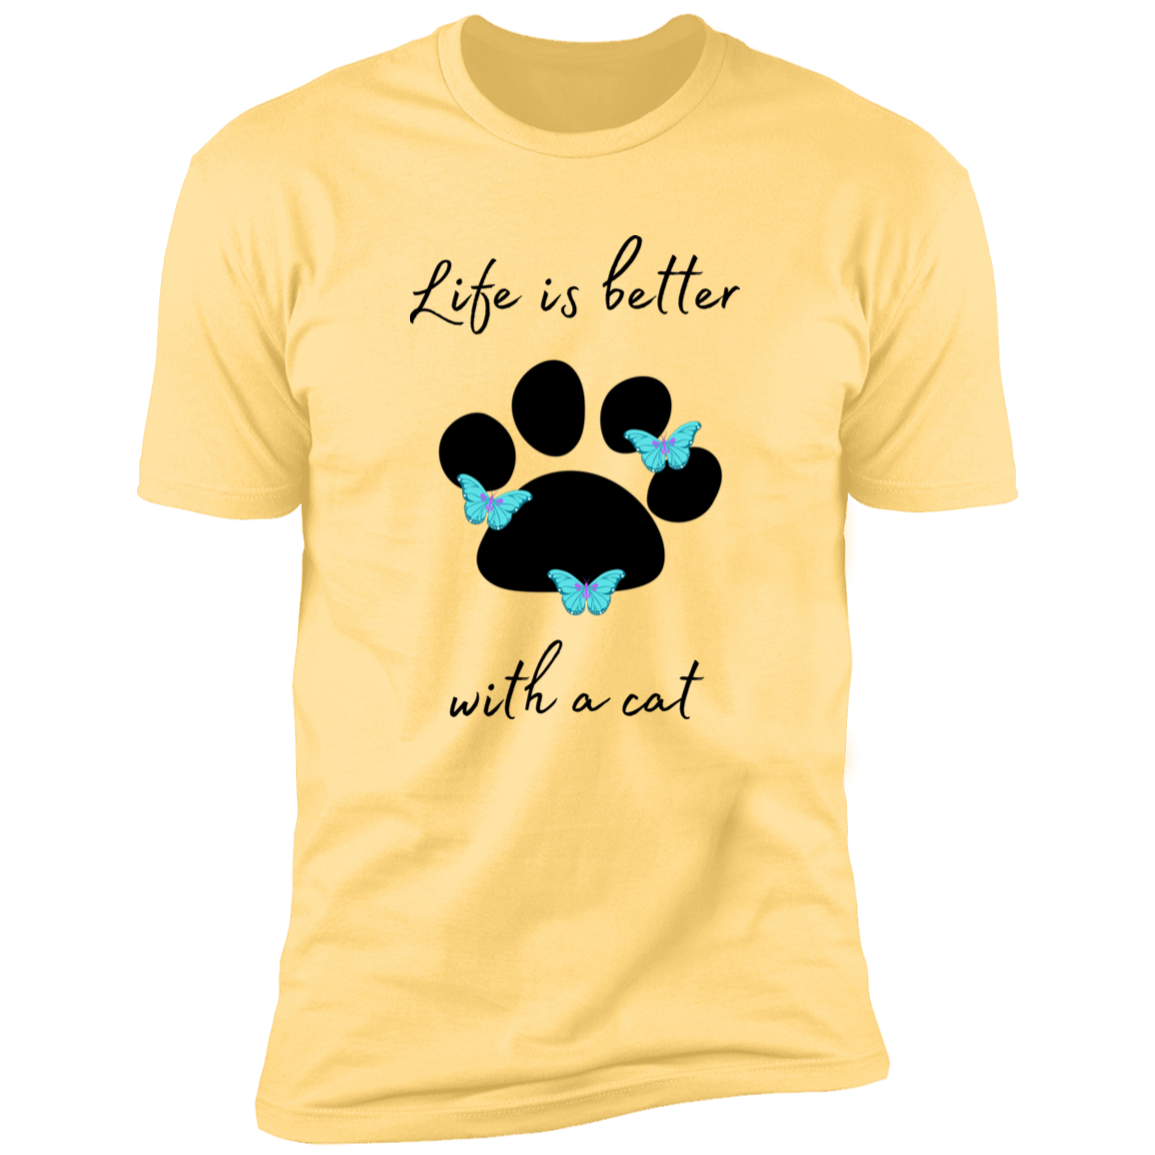 Life is Better with a Cat T-shirt, cat shirt for humans, Cat T-shirt in banana cream